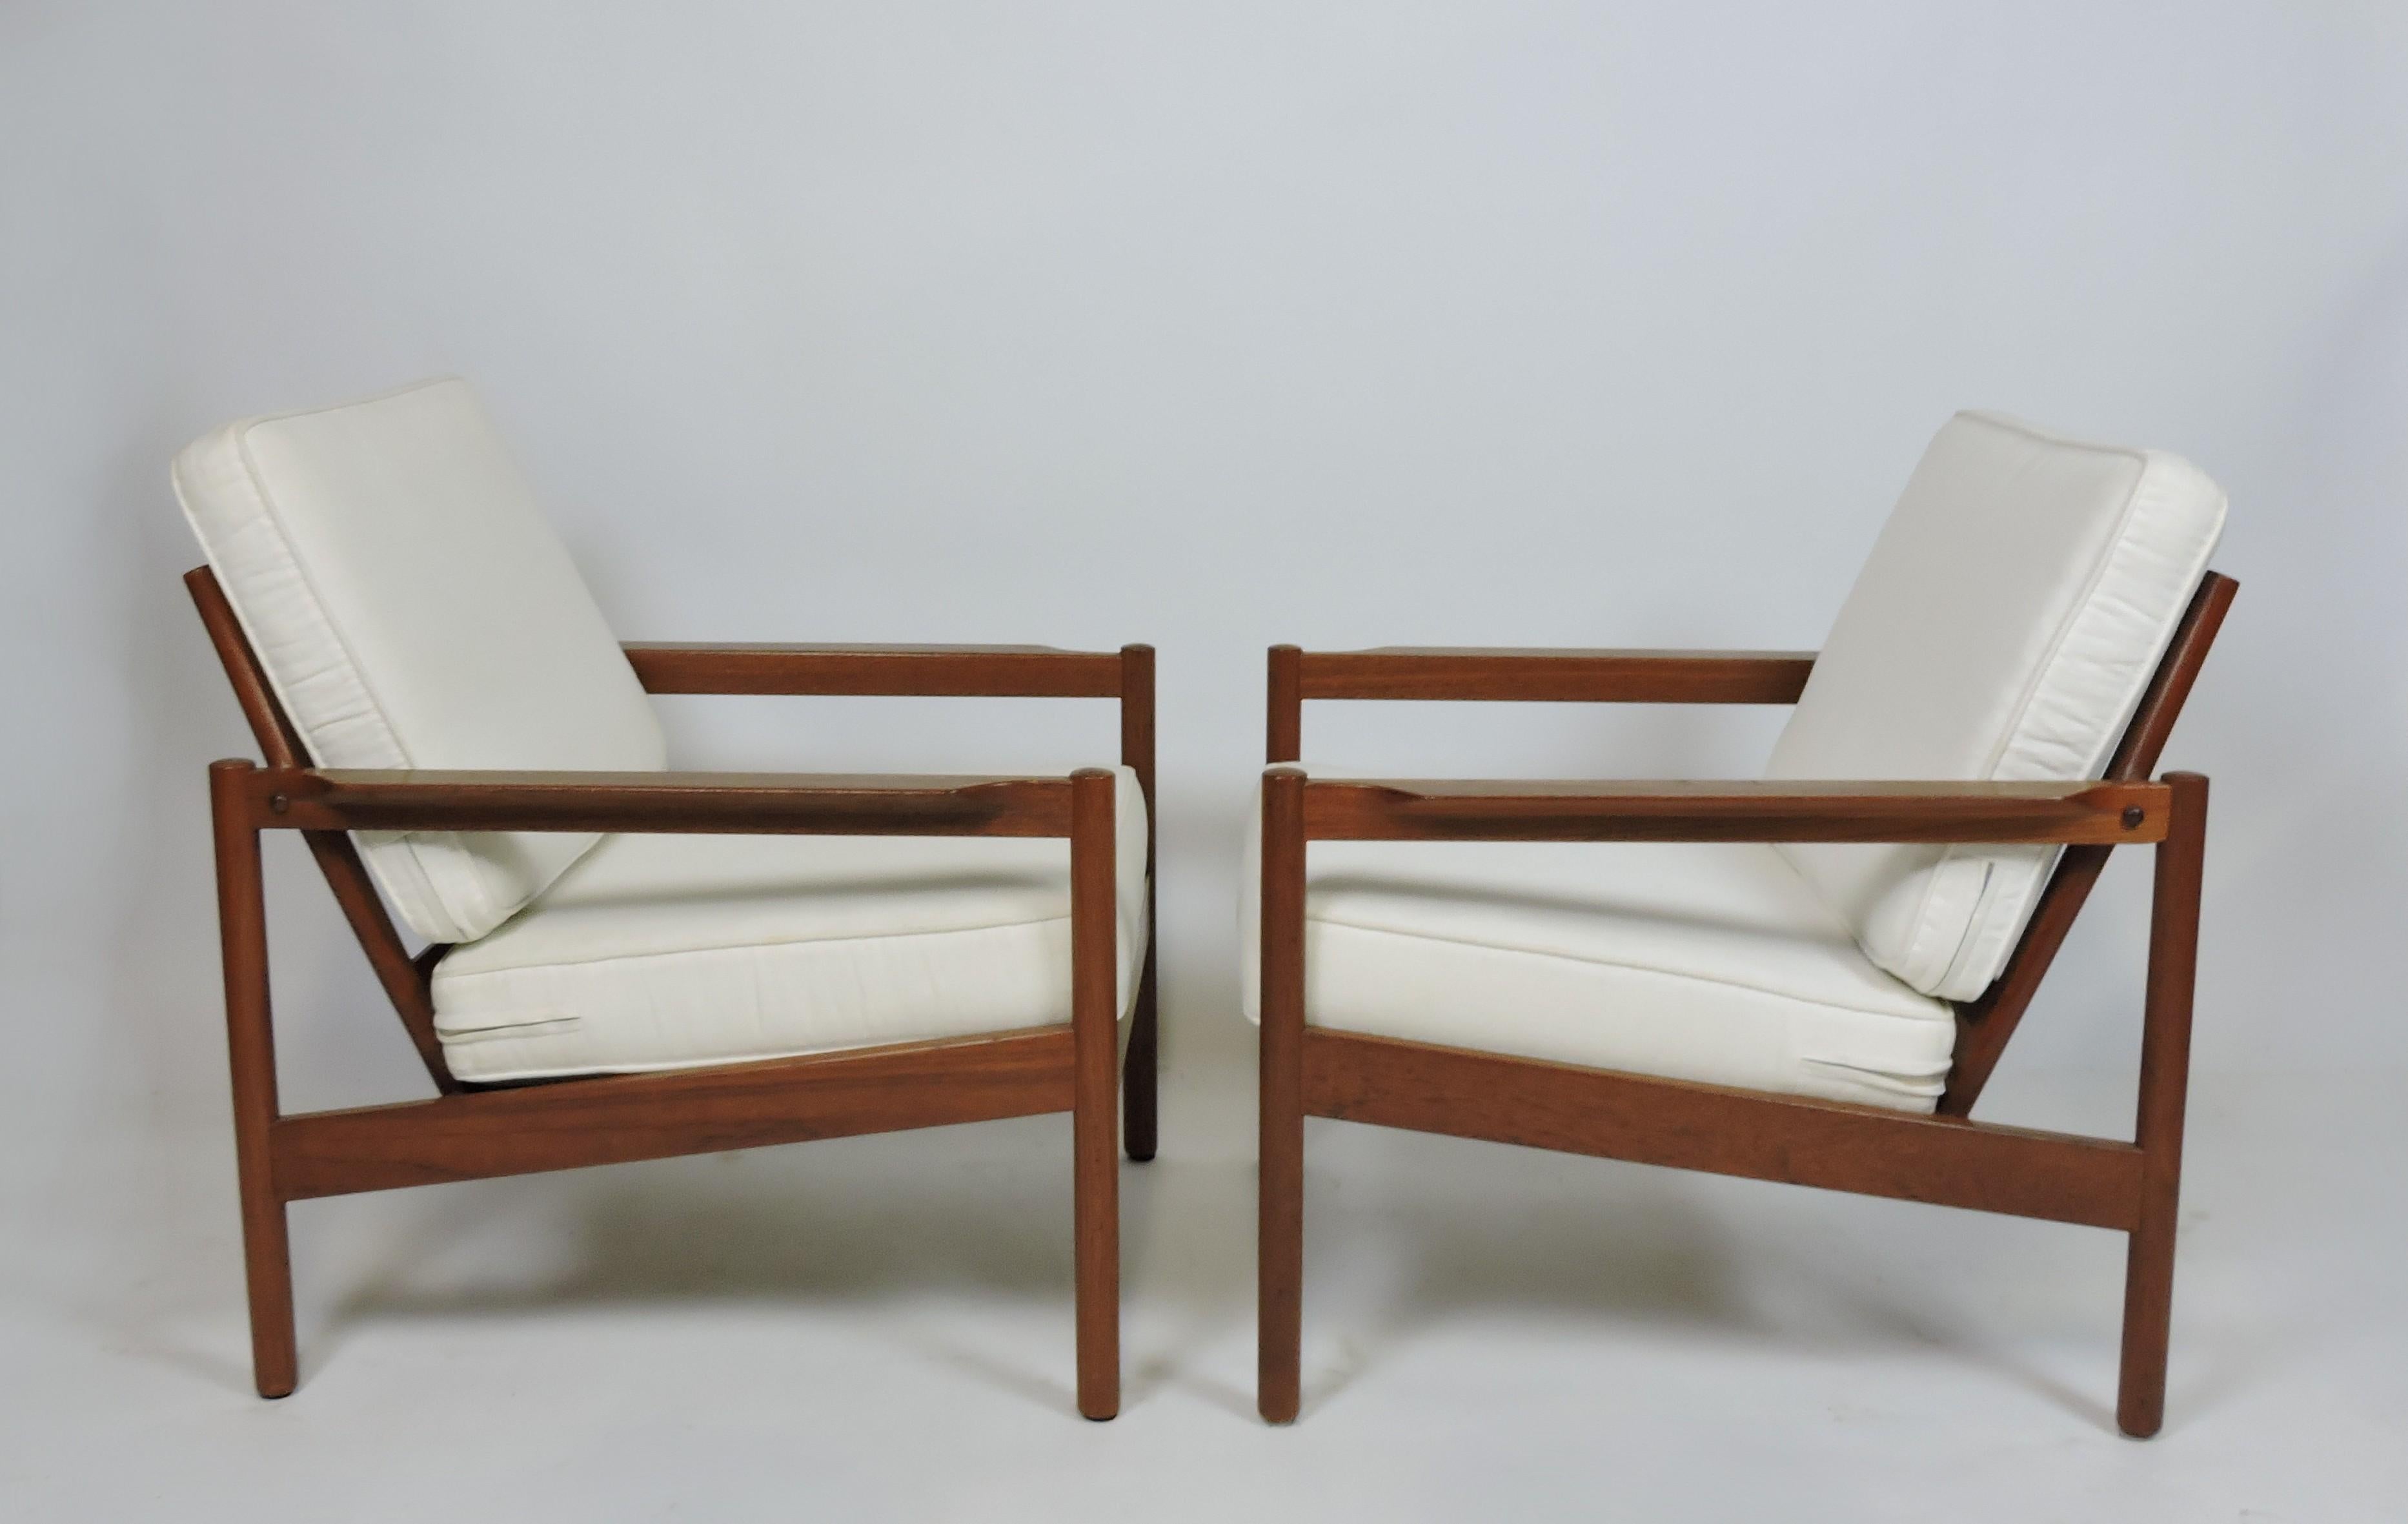 Handsome pair of open arm lounge chairs, model KK161, designed by Kai Kristiansen and manufactured in Denmark by high-quality furniture maker, Magnus Olesen. These very comfortable chairs are made of solid teak with two loose cushions that are